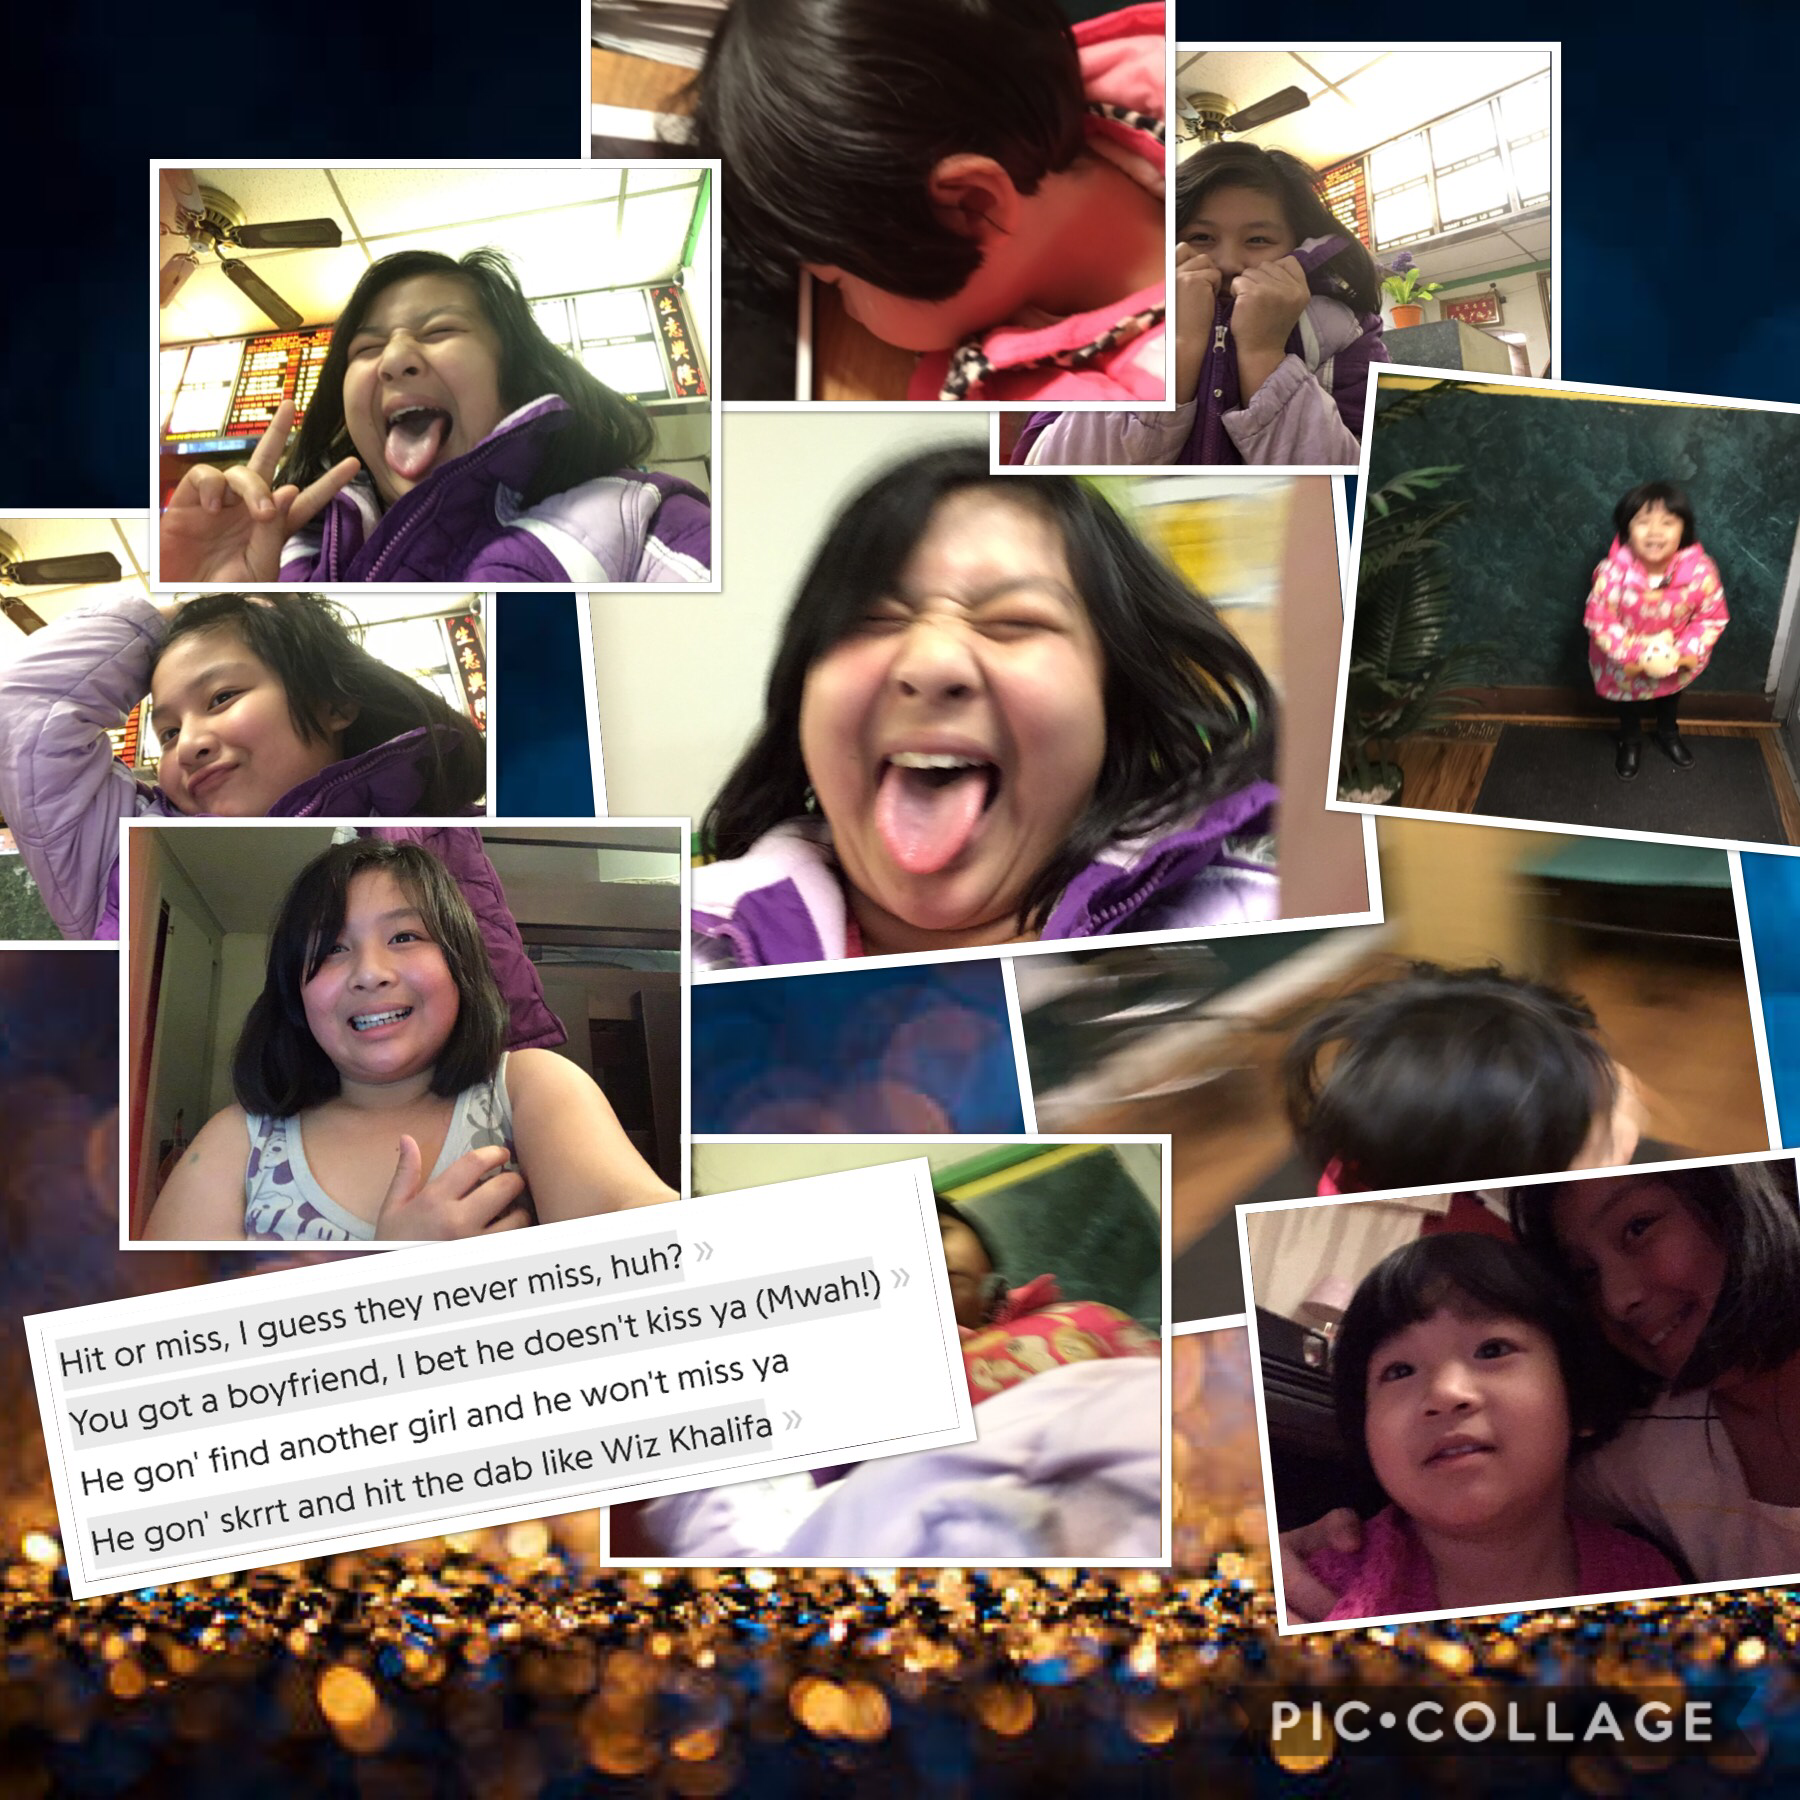 Hello pic collage I am so happy to see you again. And this is a collage of me and my little sister. I love you guys. And love these designs. One question how to I update pic collage very time the app asks me if I want to update I say yes but it says there